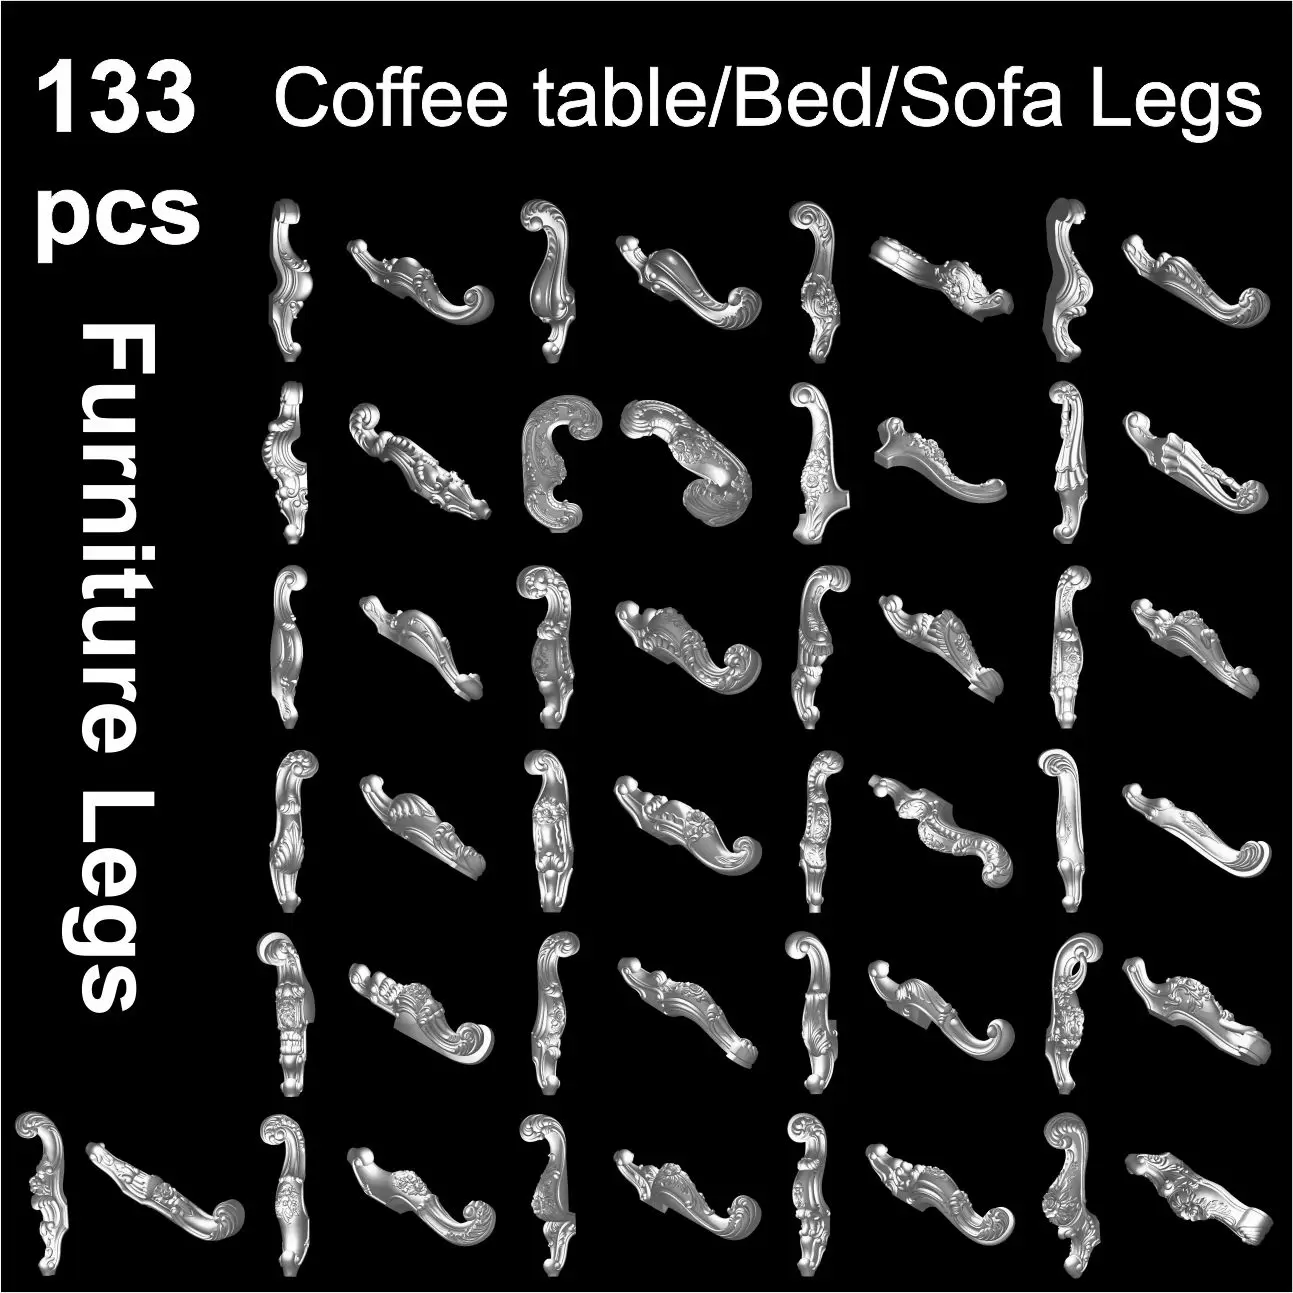 133pcs Furniture Legs 3d STL Model Relief for CNC Router Aspire Artcam Sofa/Coffee table/bed legs